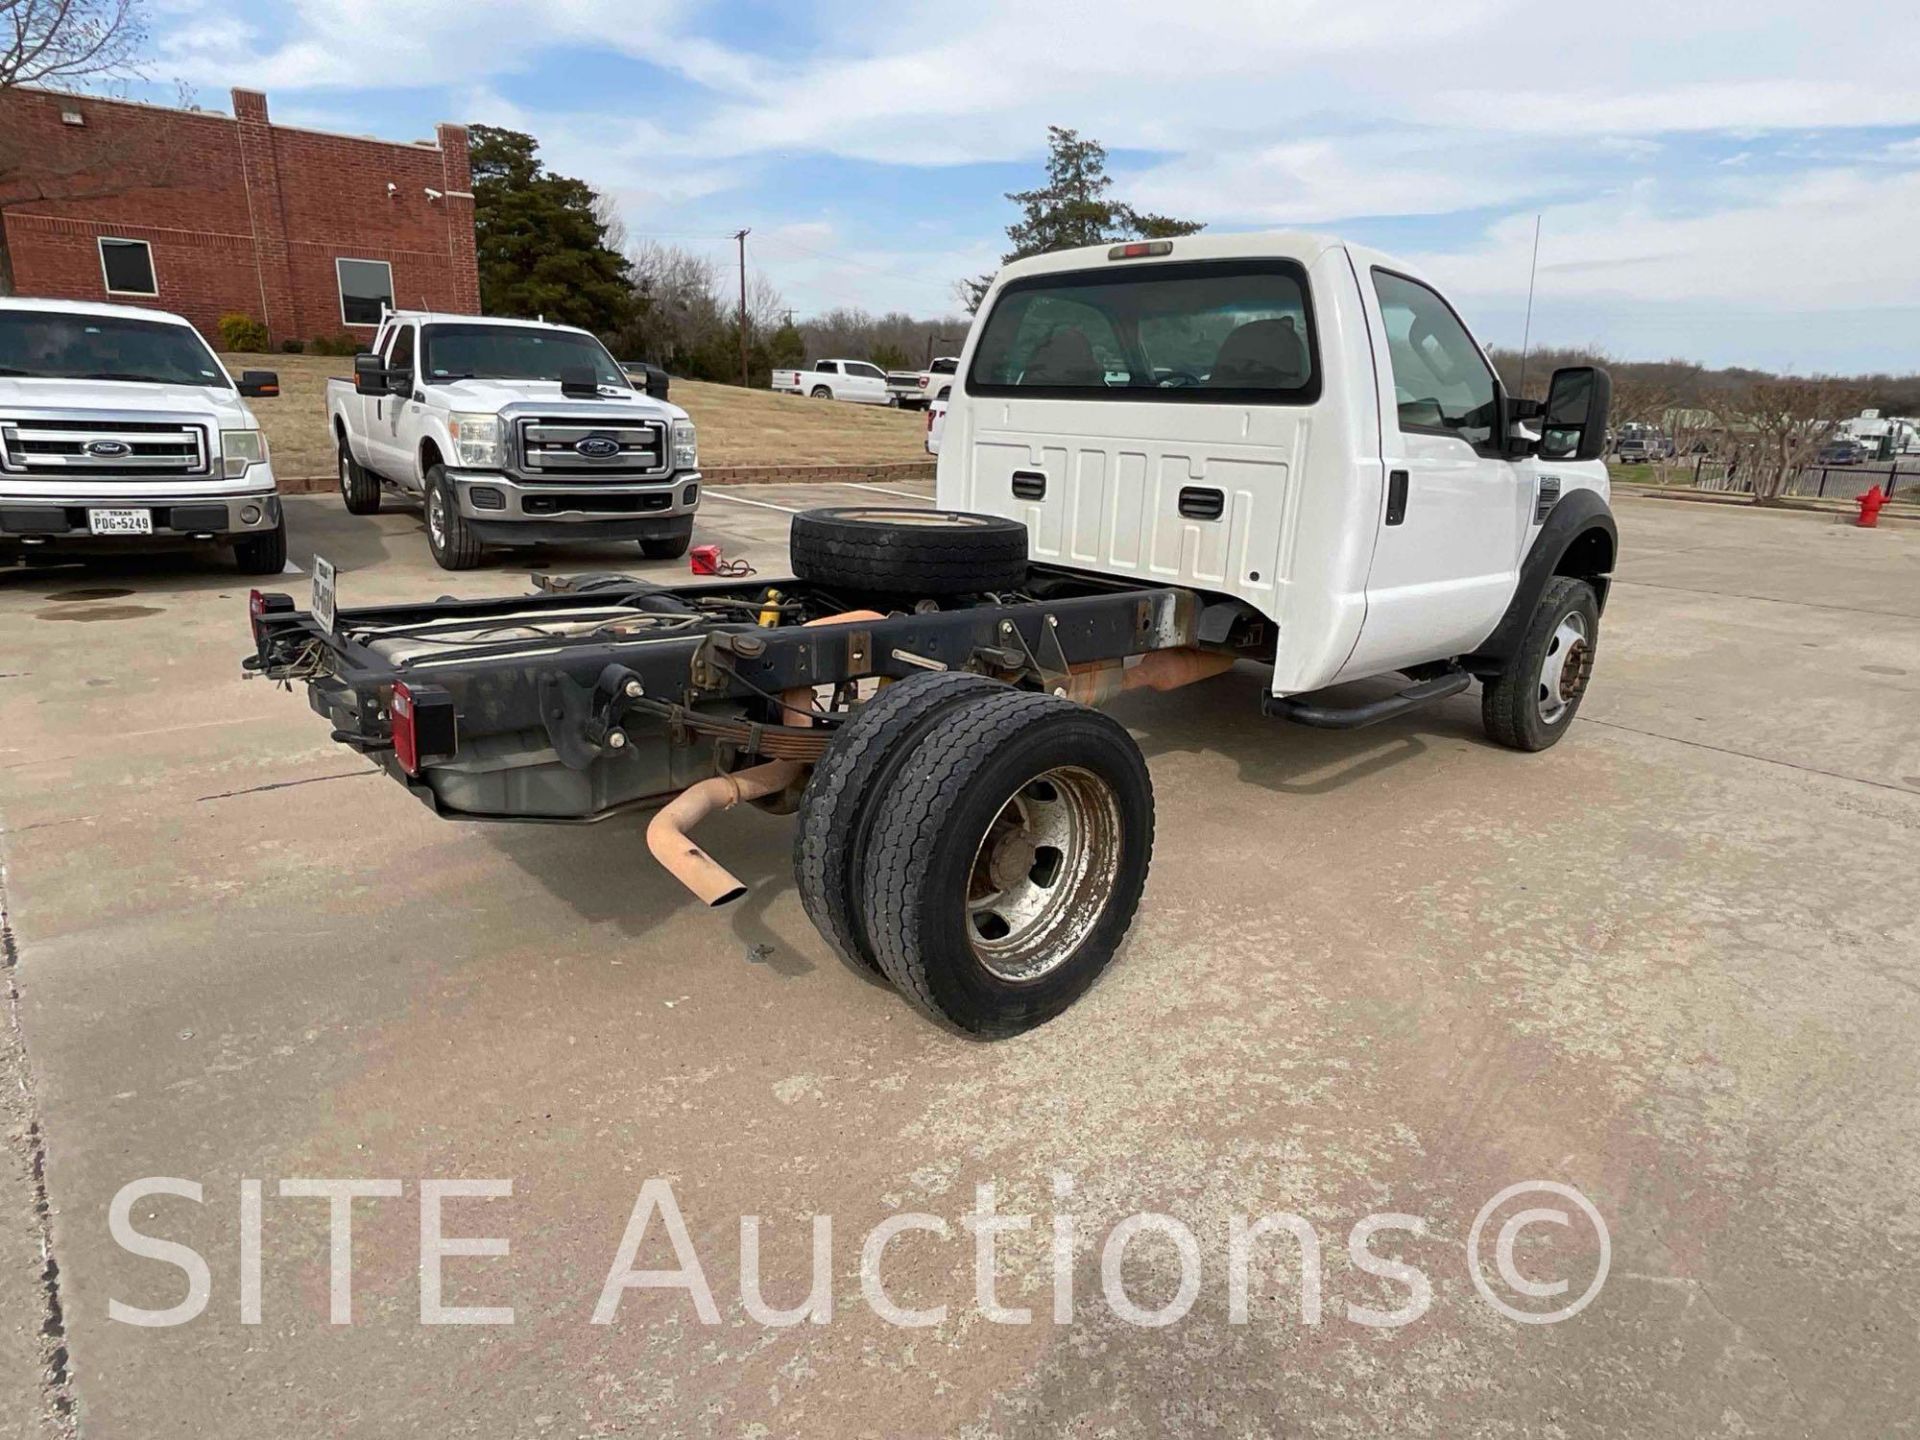 2010 Ford F450 SD Cab & Chassis Truck - Image 5 of 20